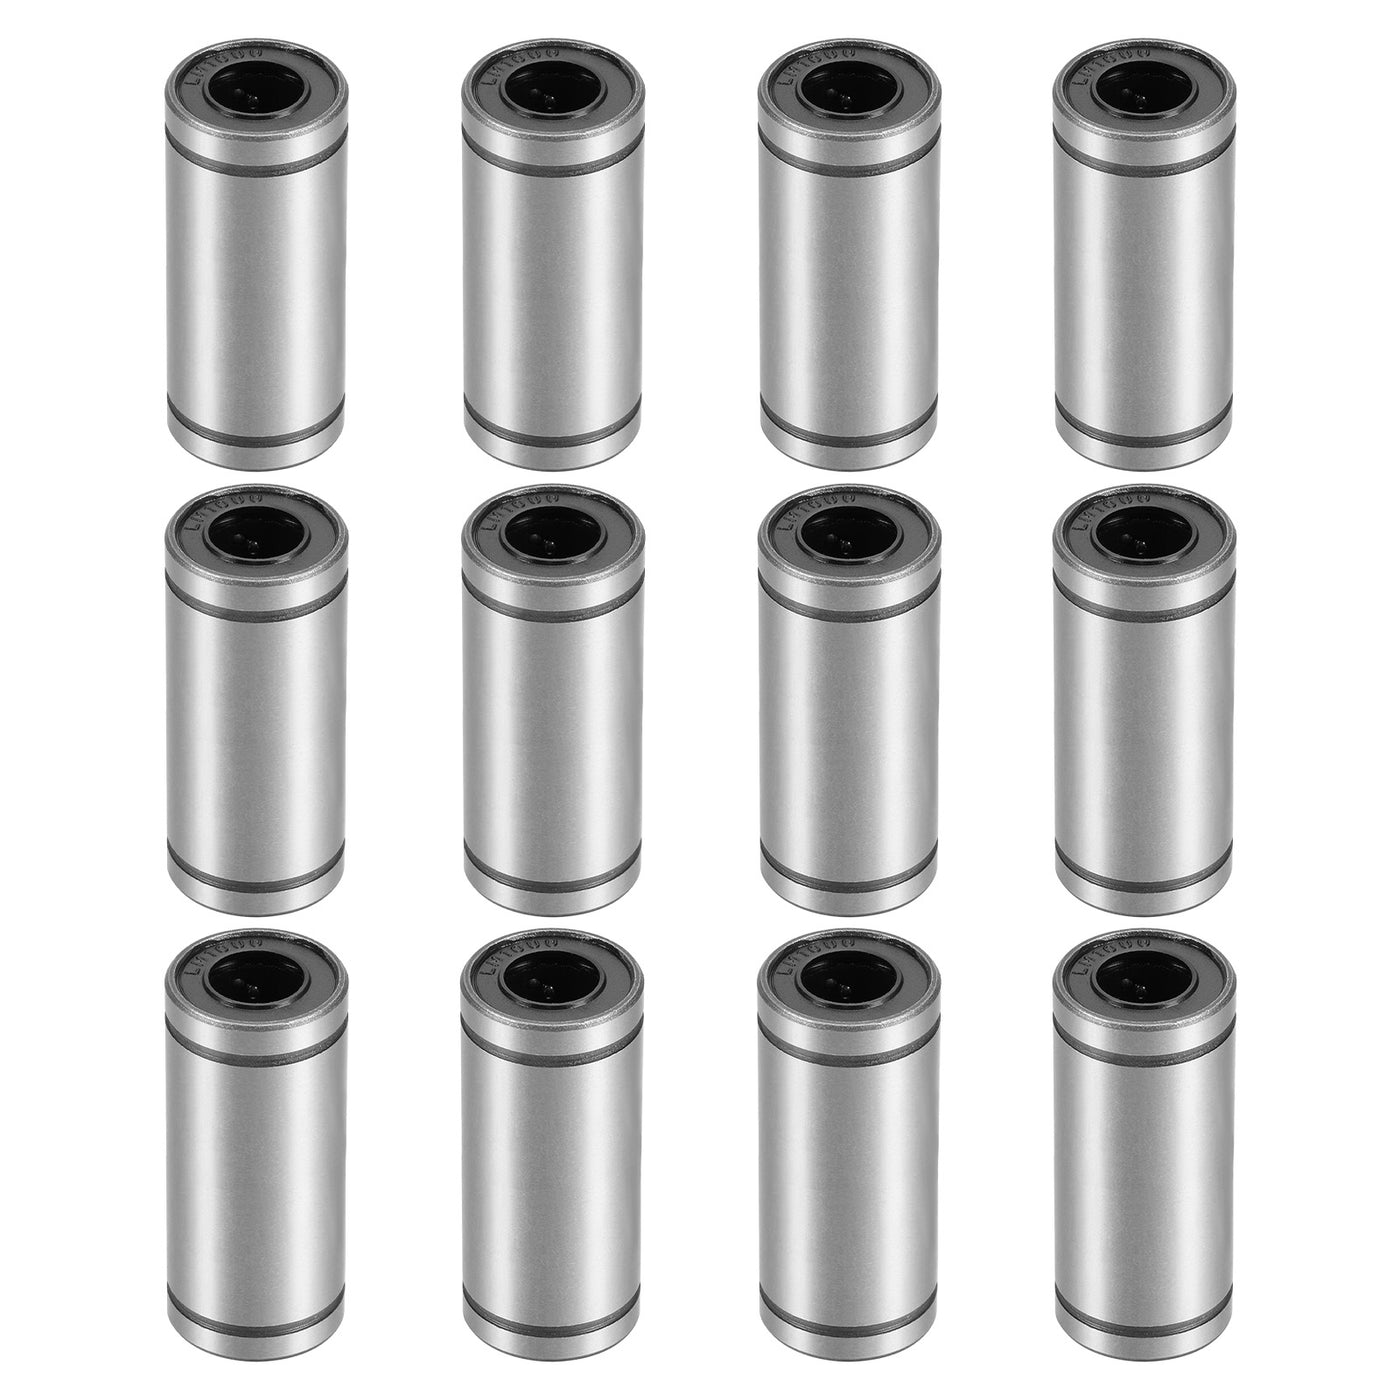 uxcell Uxcell 12pcs LM10LUU Linear Ball Bearings, 10mm Bore 19mm OD 55mm Long Linear Bearing for CNC, 3D Printer